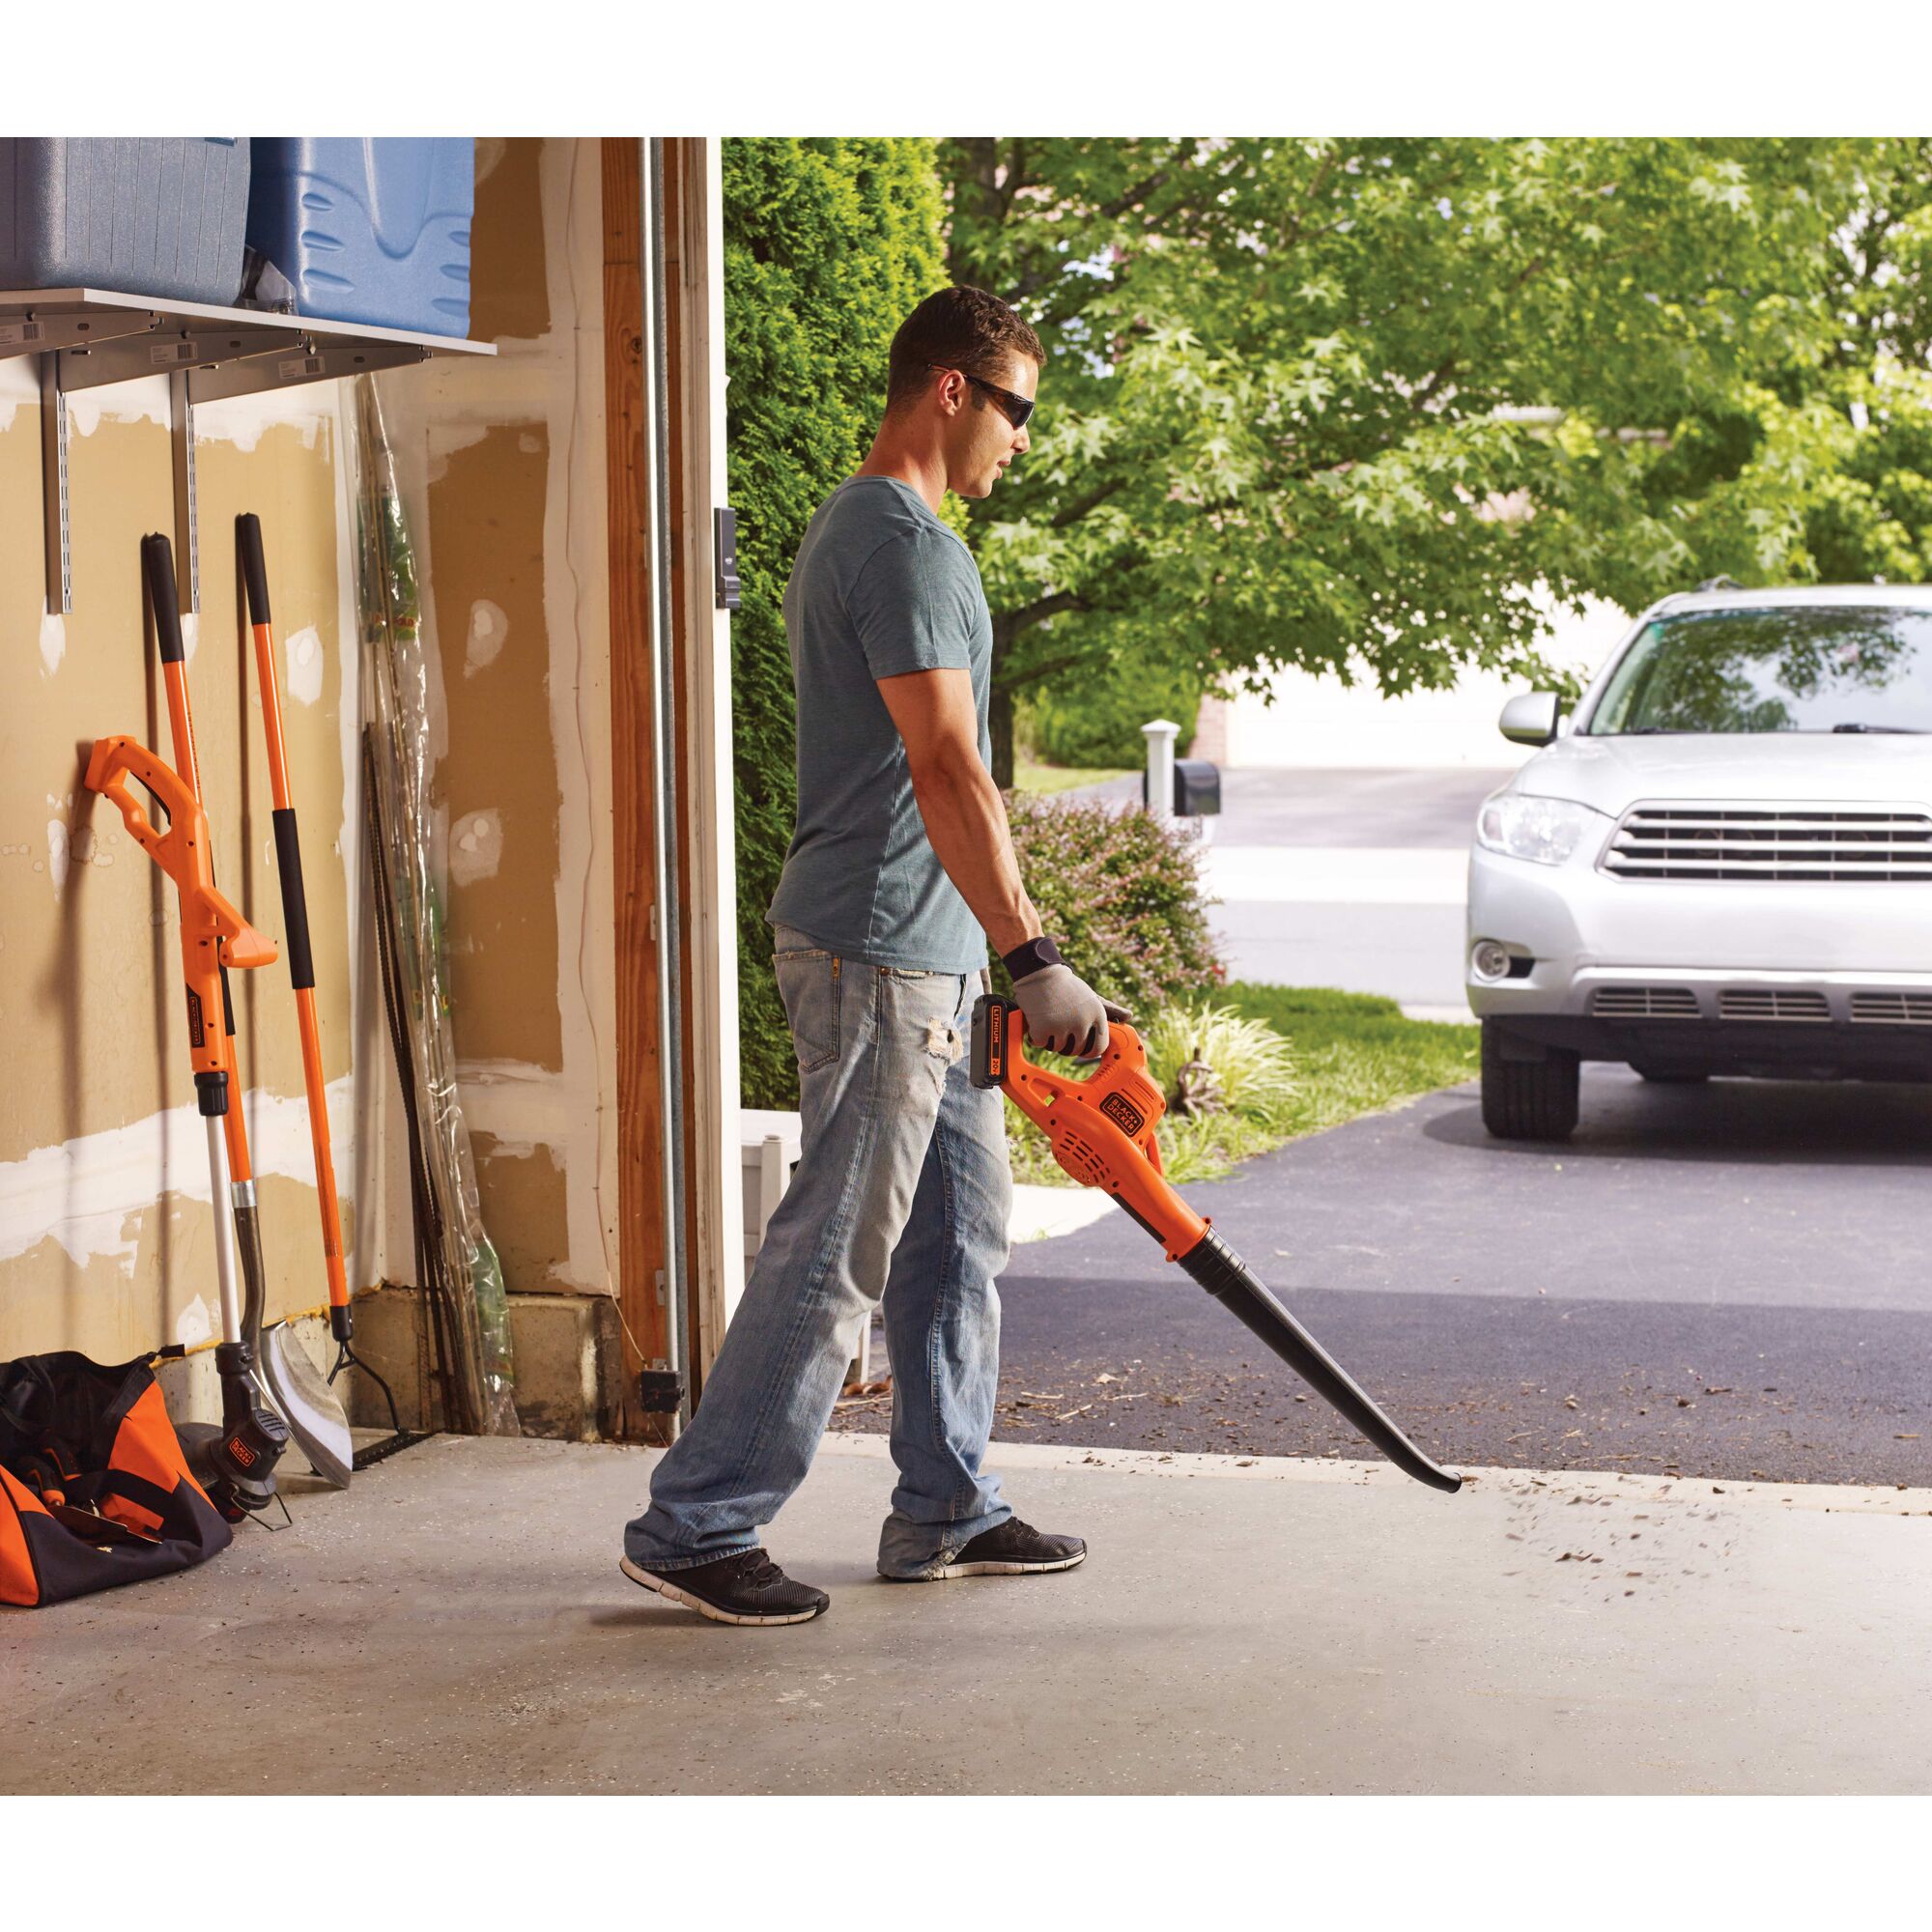 Man using 20V Max Lithium Sweeper to clear debris from a garage.